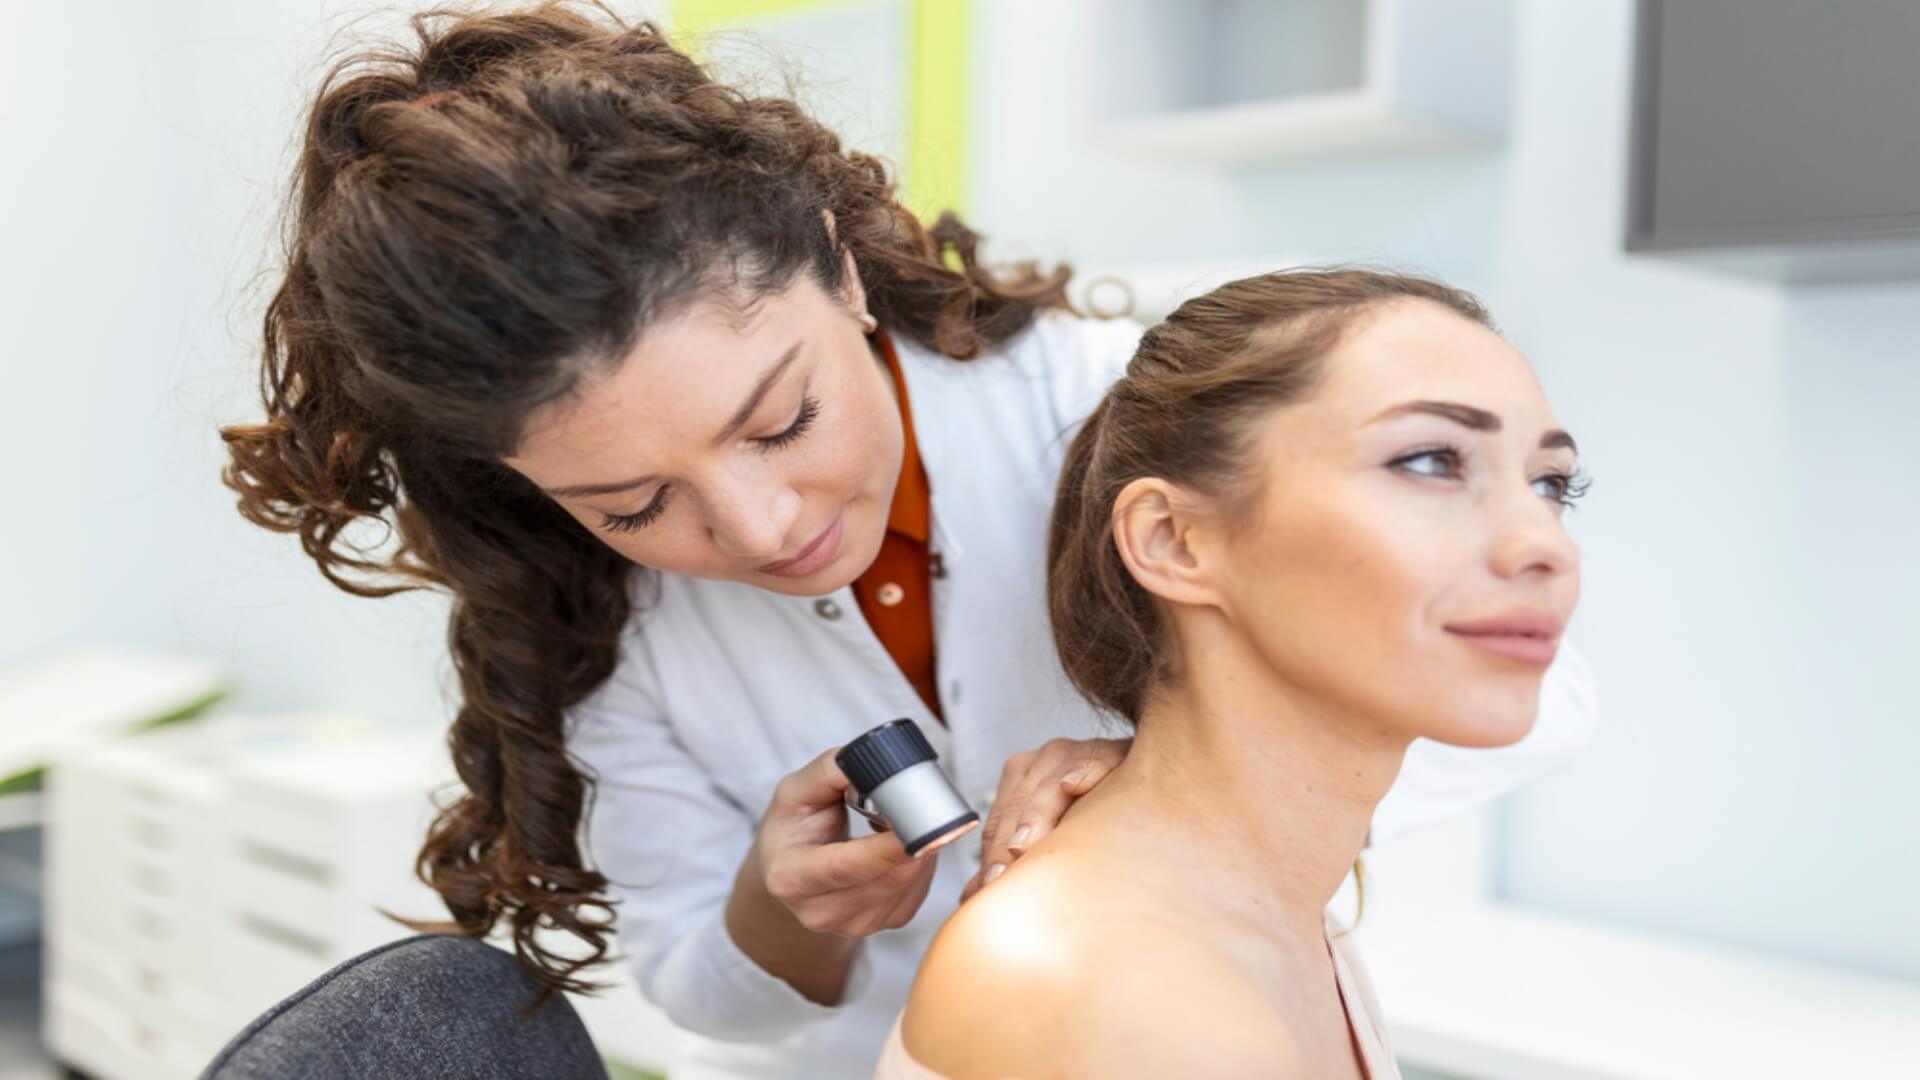 The Ultimate Guide To Finding The Right Dermatologist For You